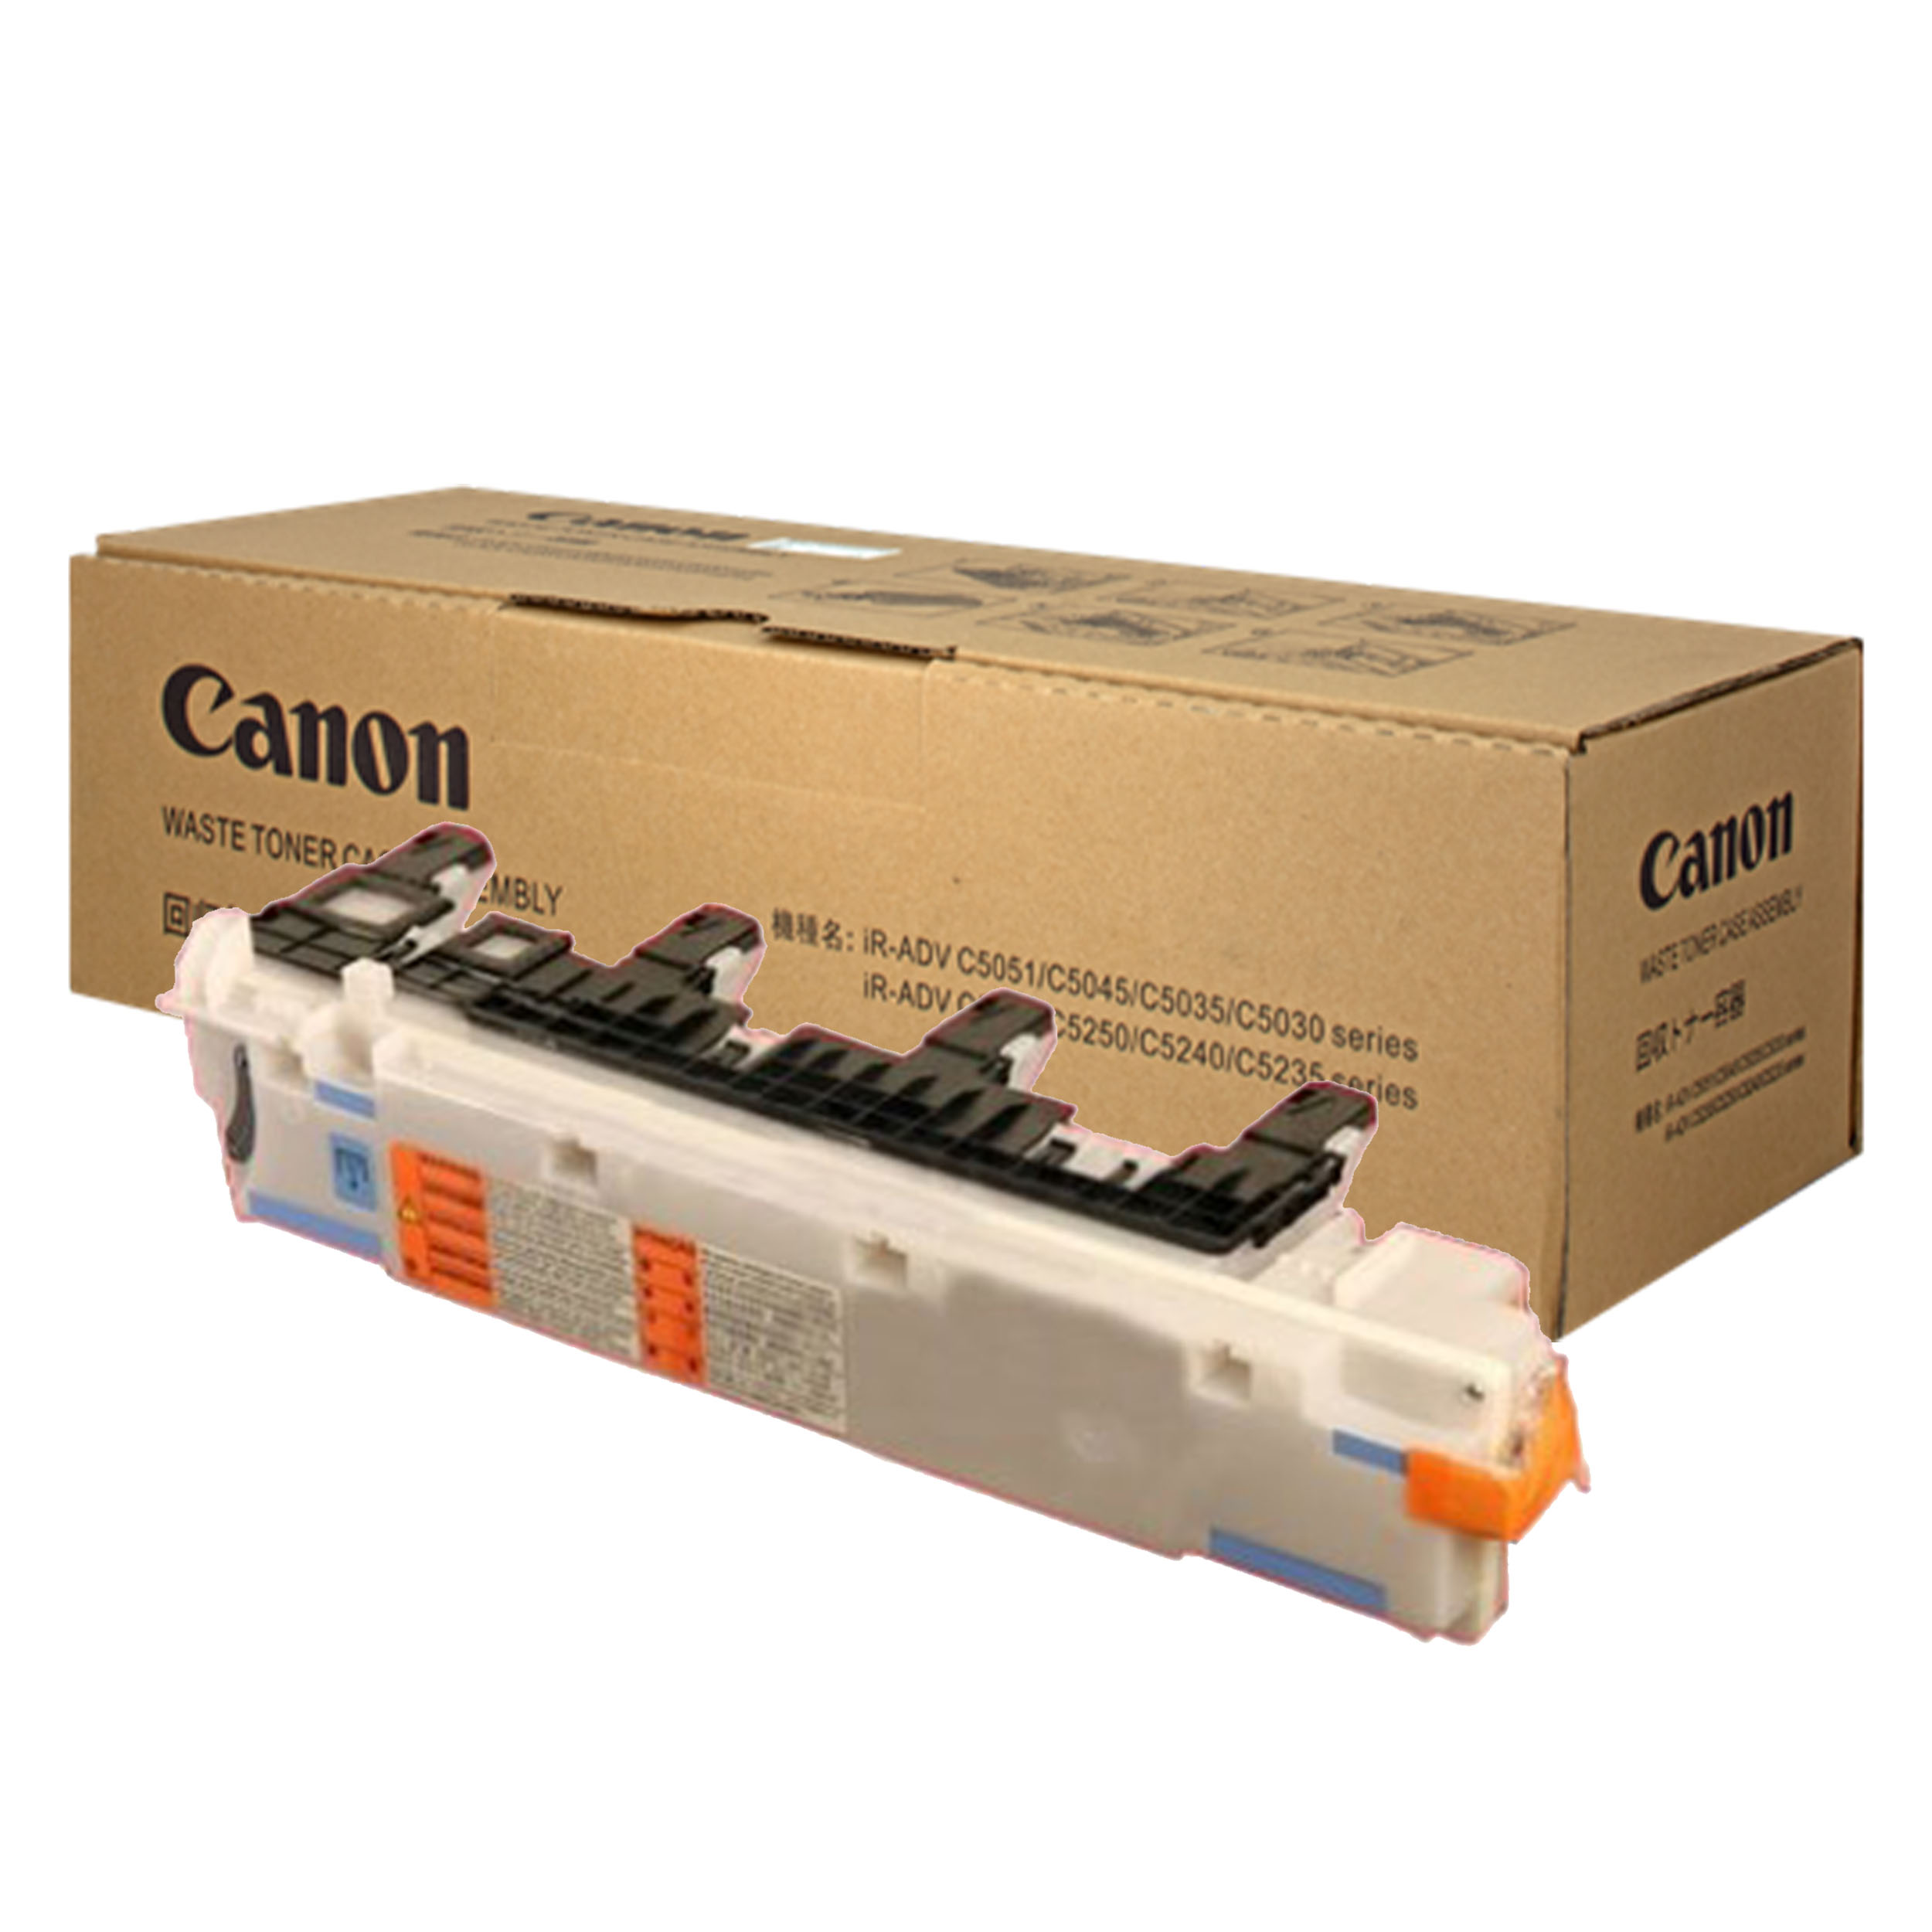 Canon FM4-8400-010 Waste Toner Container Toner 20000 Yield 